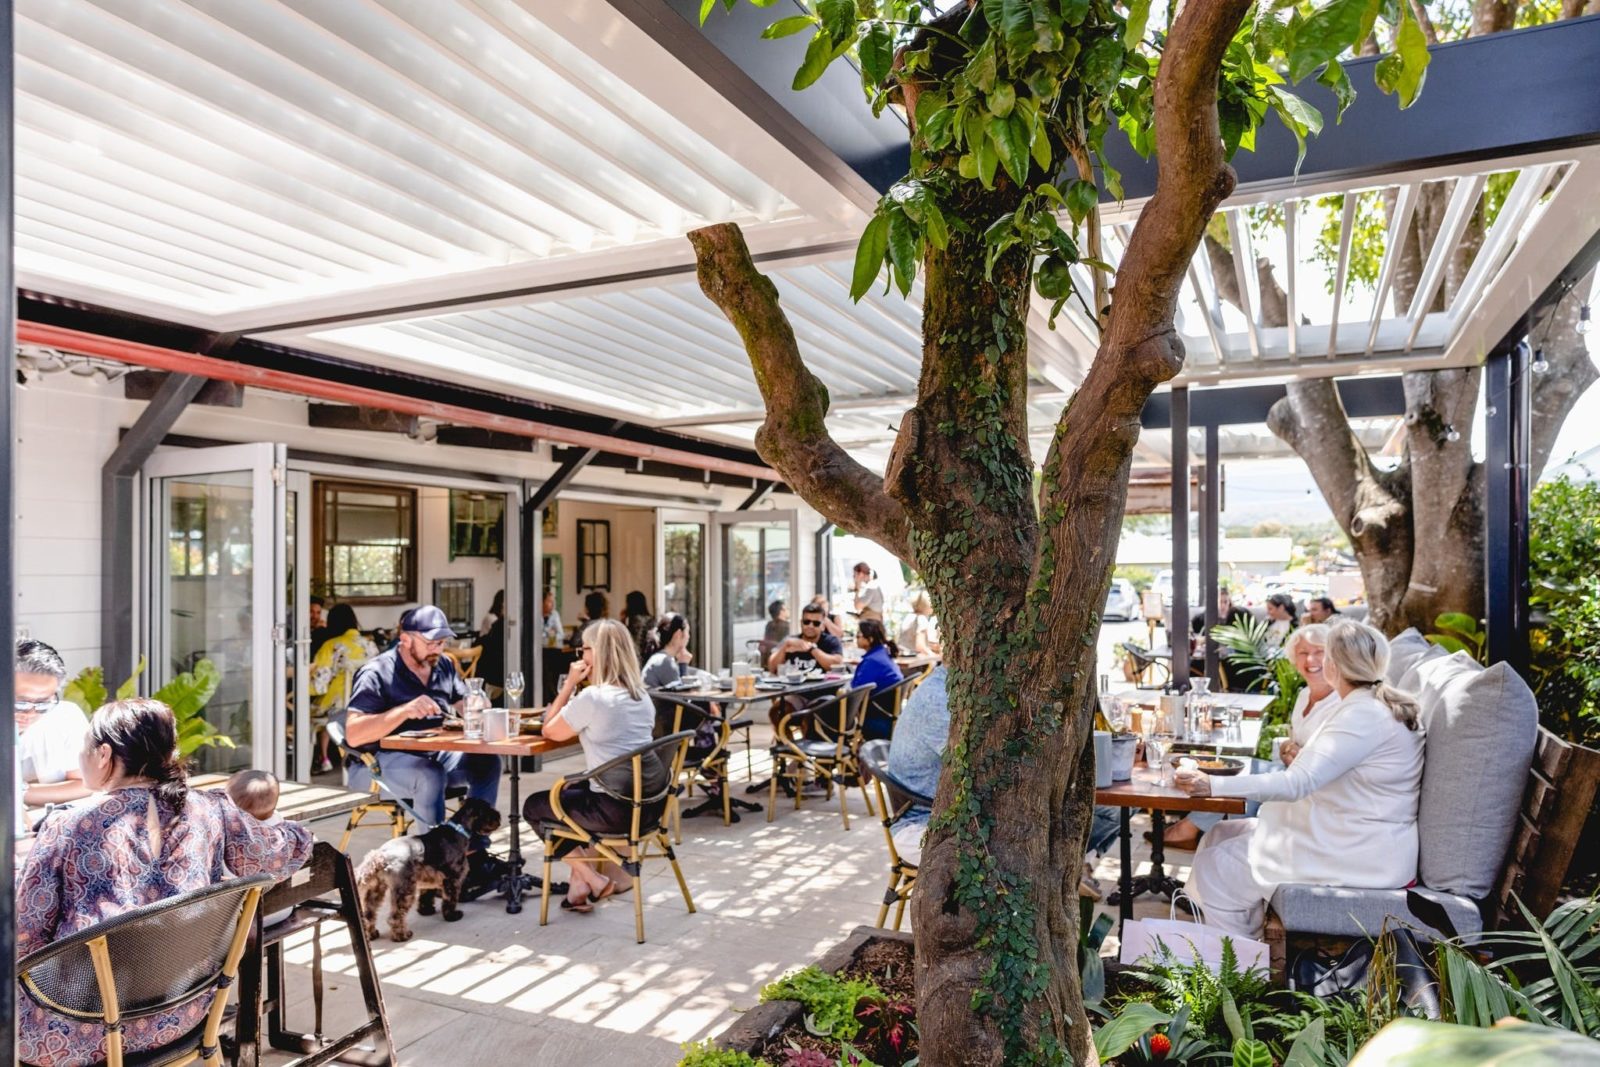 All-Weather covered outdoor dining, with vergola awning and shutters that let in the light